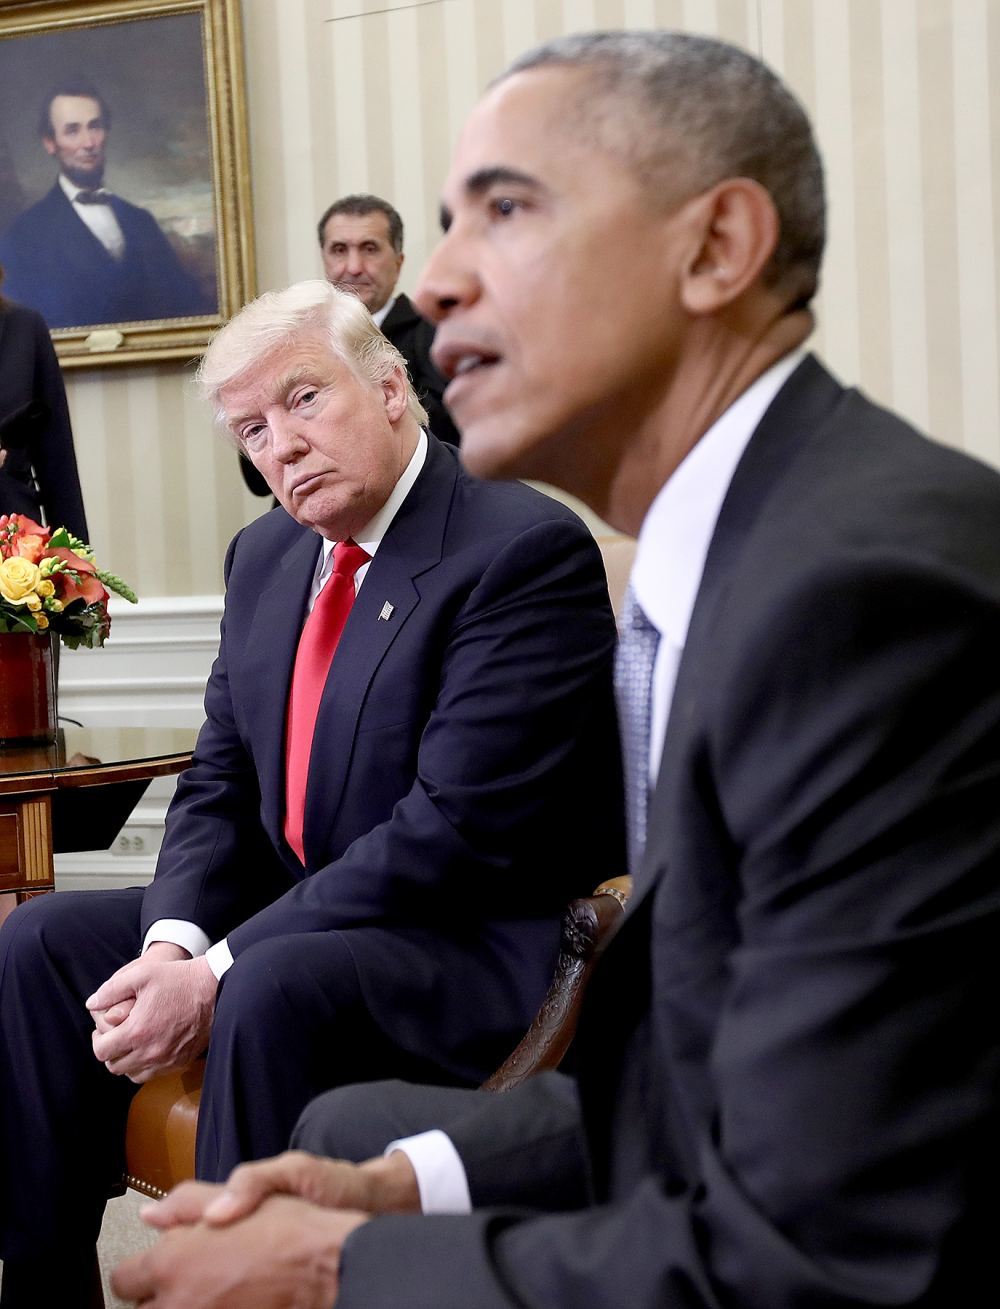 President-elect Donald Trump (L) listens as U.S. President Barack Obama speaks during a meeting in the Oval Office November 10, 2016 in Washington, DC. Trump is scheduled to meet with members of the Republican leadership in Congress later today on Capitol Hill.